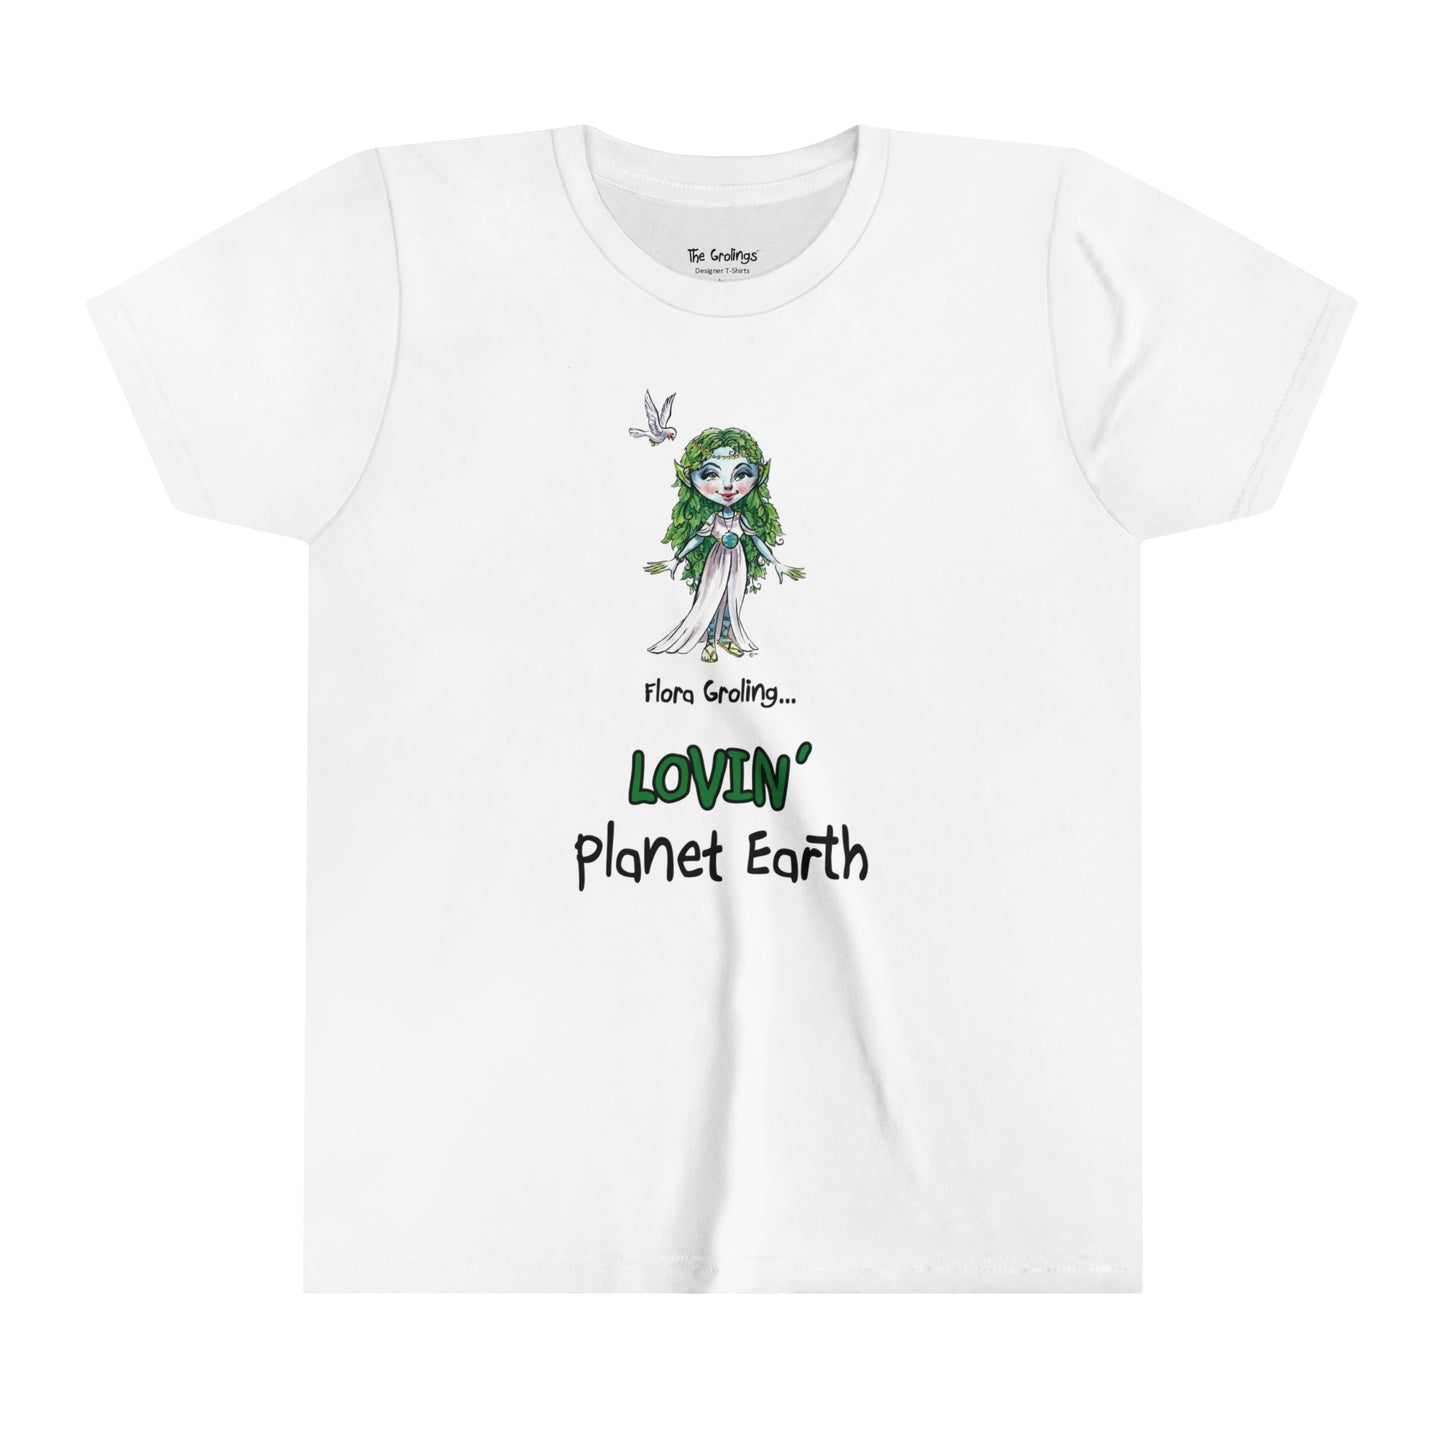 A white official USA Grolings kids t-shirt, featuring the phrase 'Flora Groling says... I'm Lovin' Planet Earth' in charming font. The t-shirt showcases Flora Groling, wearing a beautiful white dress and an Earth necklace.